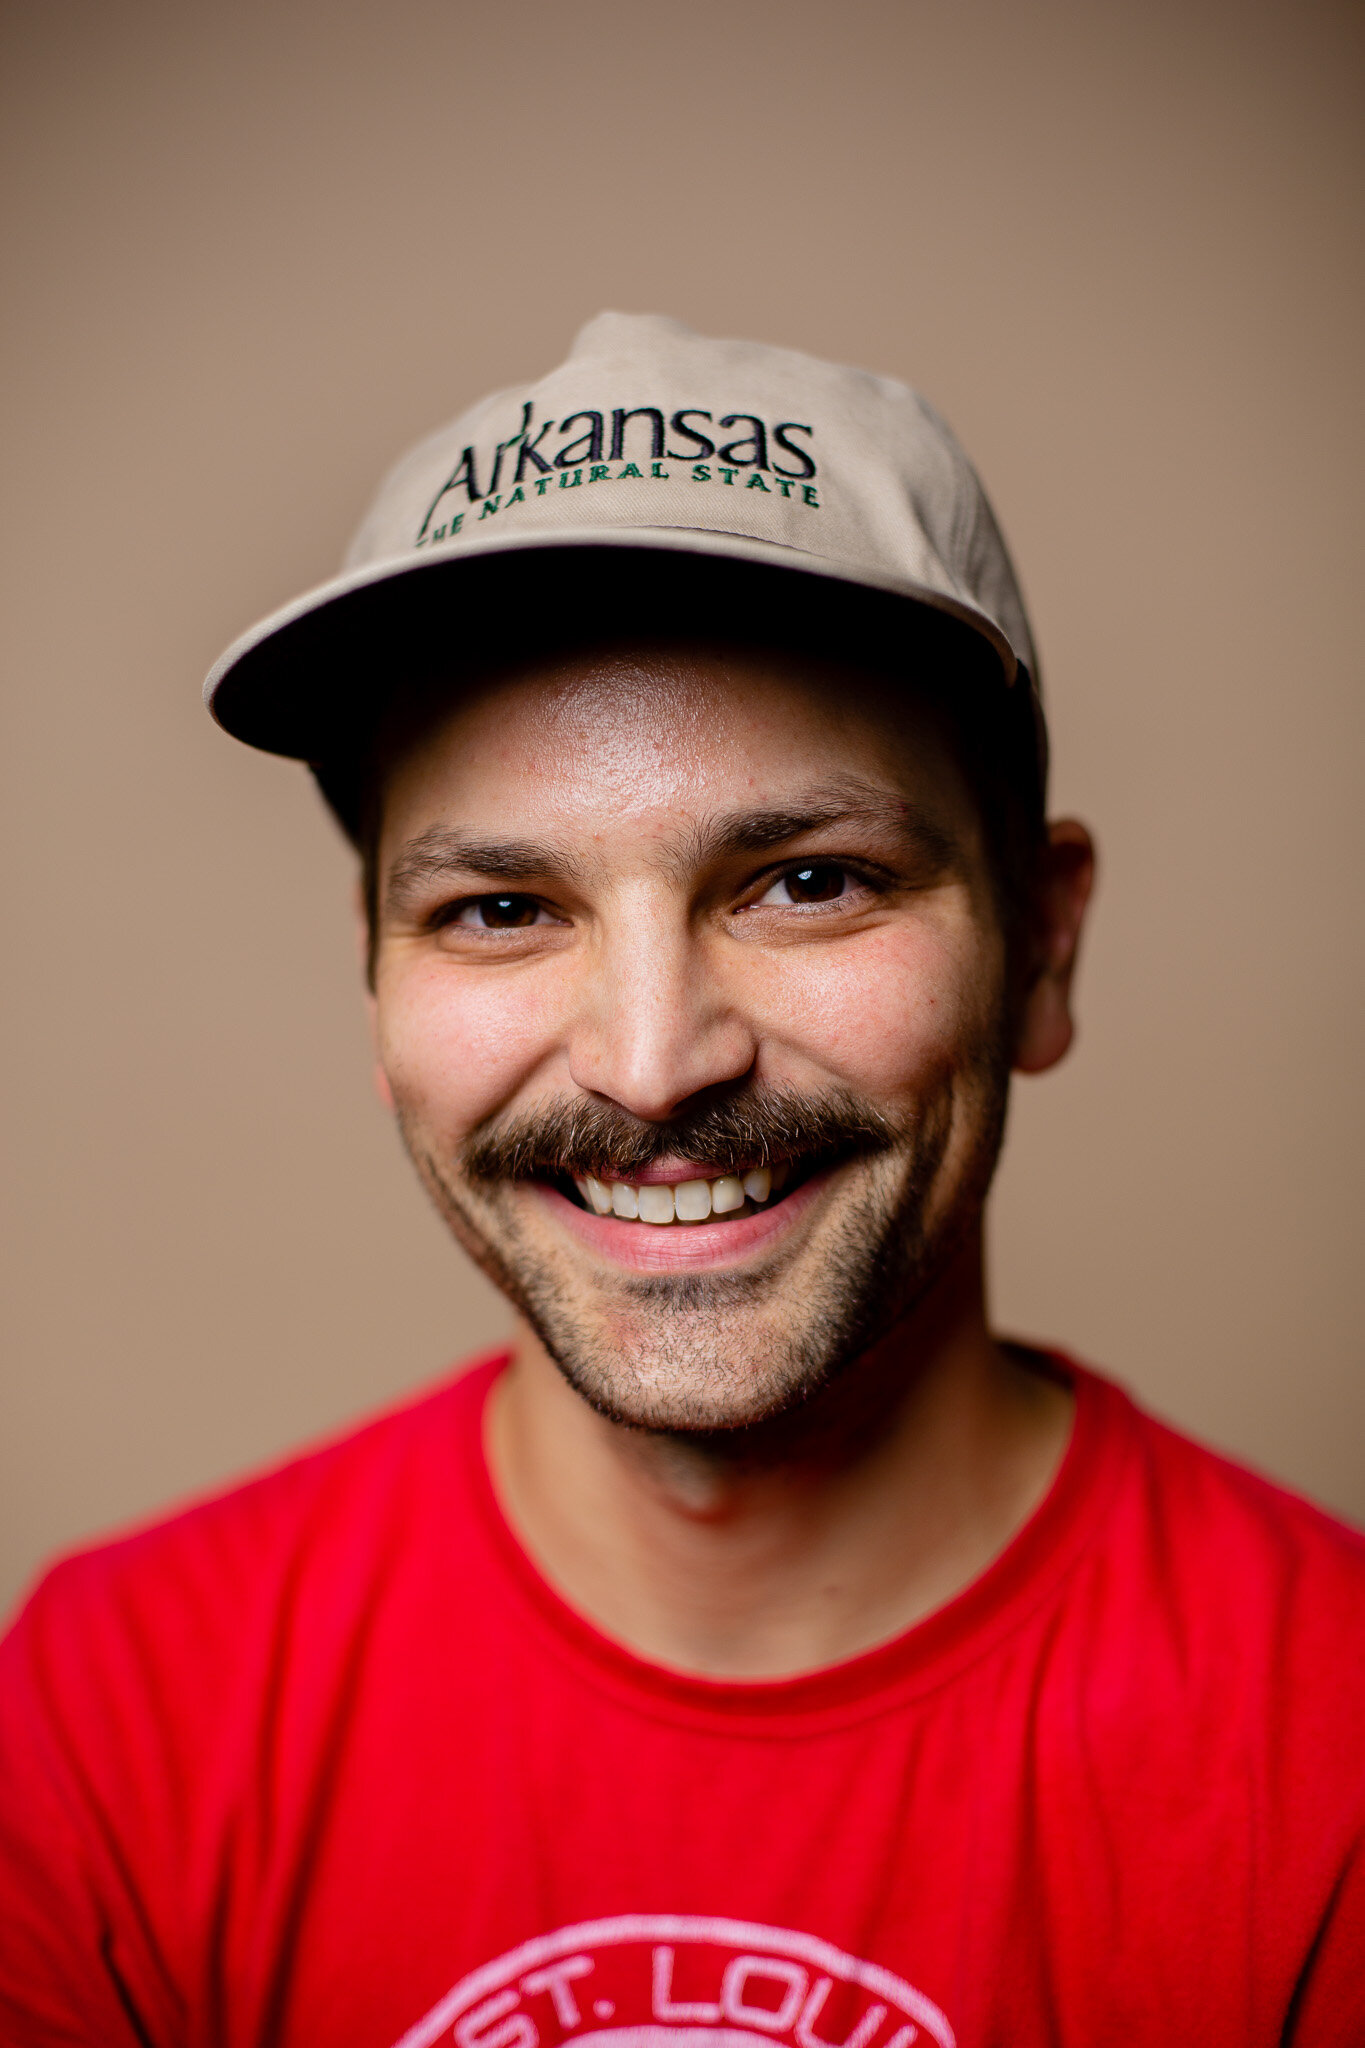 Tyler from Whippoorwill smiling and wearing an Arkansas hat